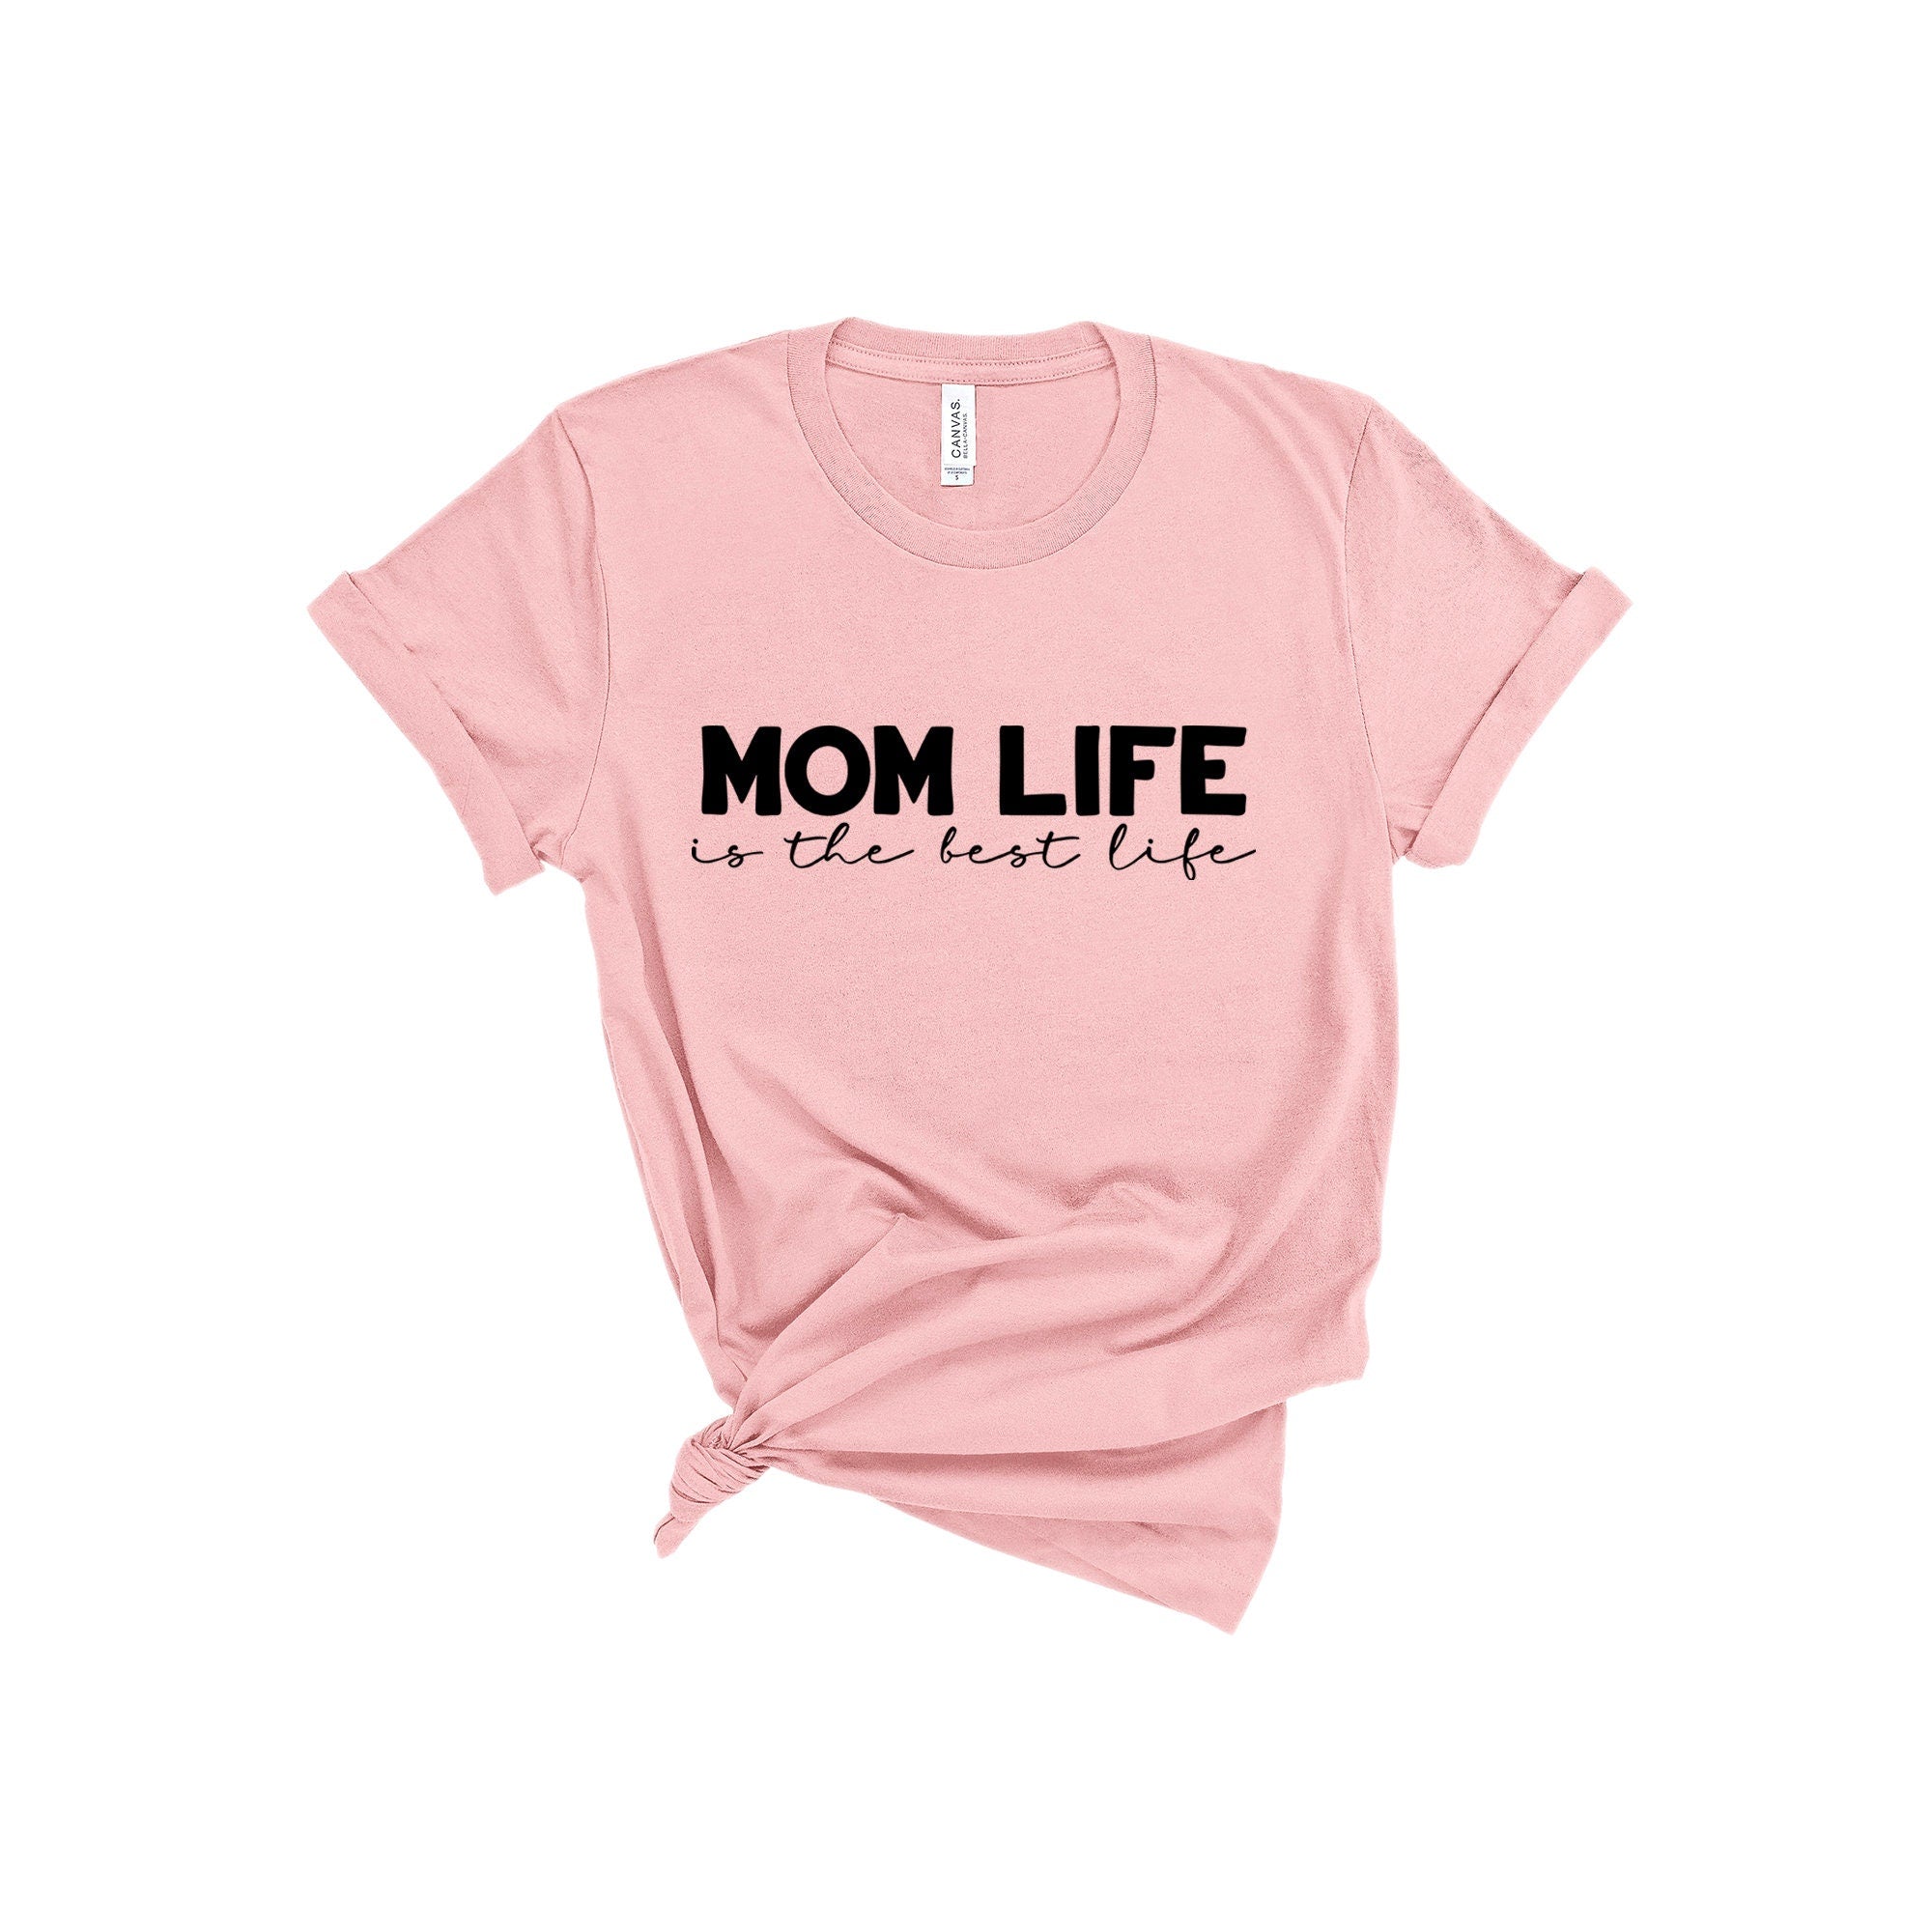 Mom Life Shirt, Mothers Day Gifts, Gifts for Mom, Mom Shirts, Shirts for Moms, Trendy Mom T-Shirts, Cool Mom Shirts, Shirts for Moms